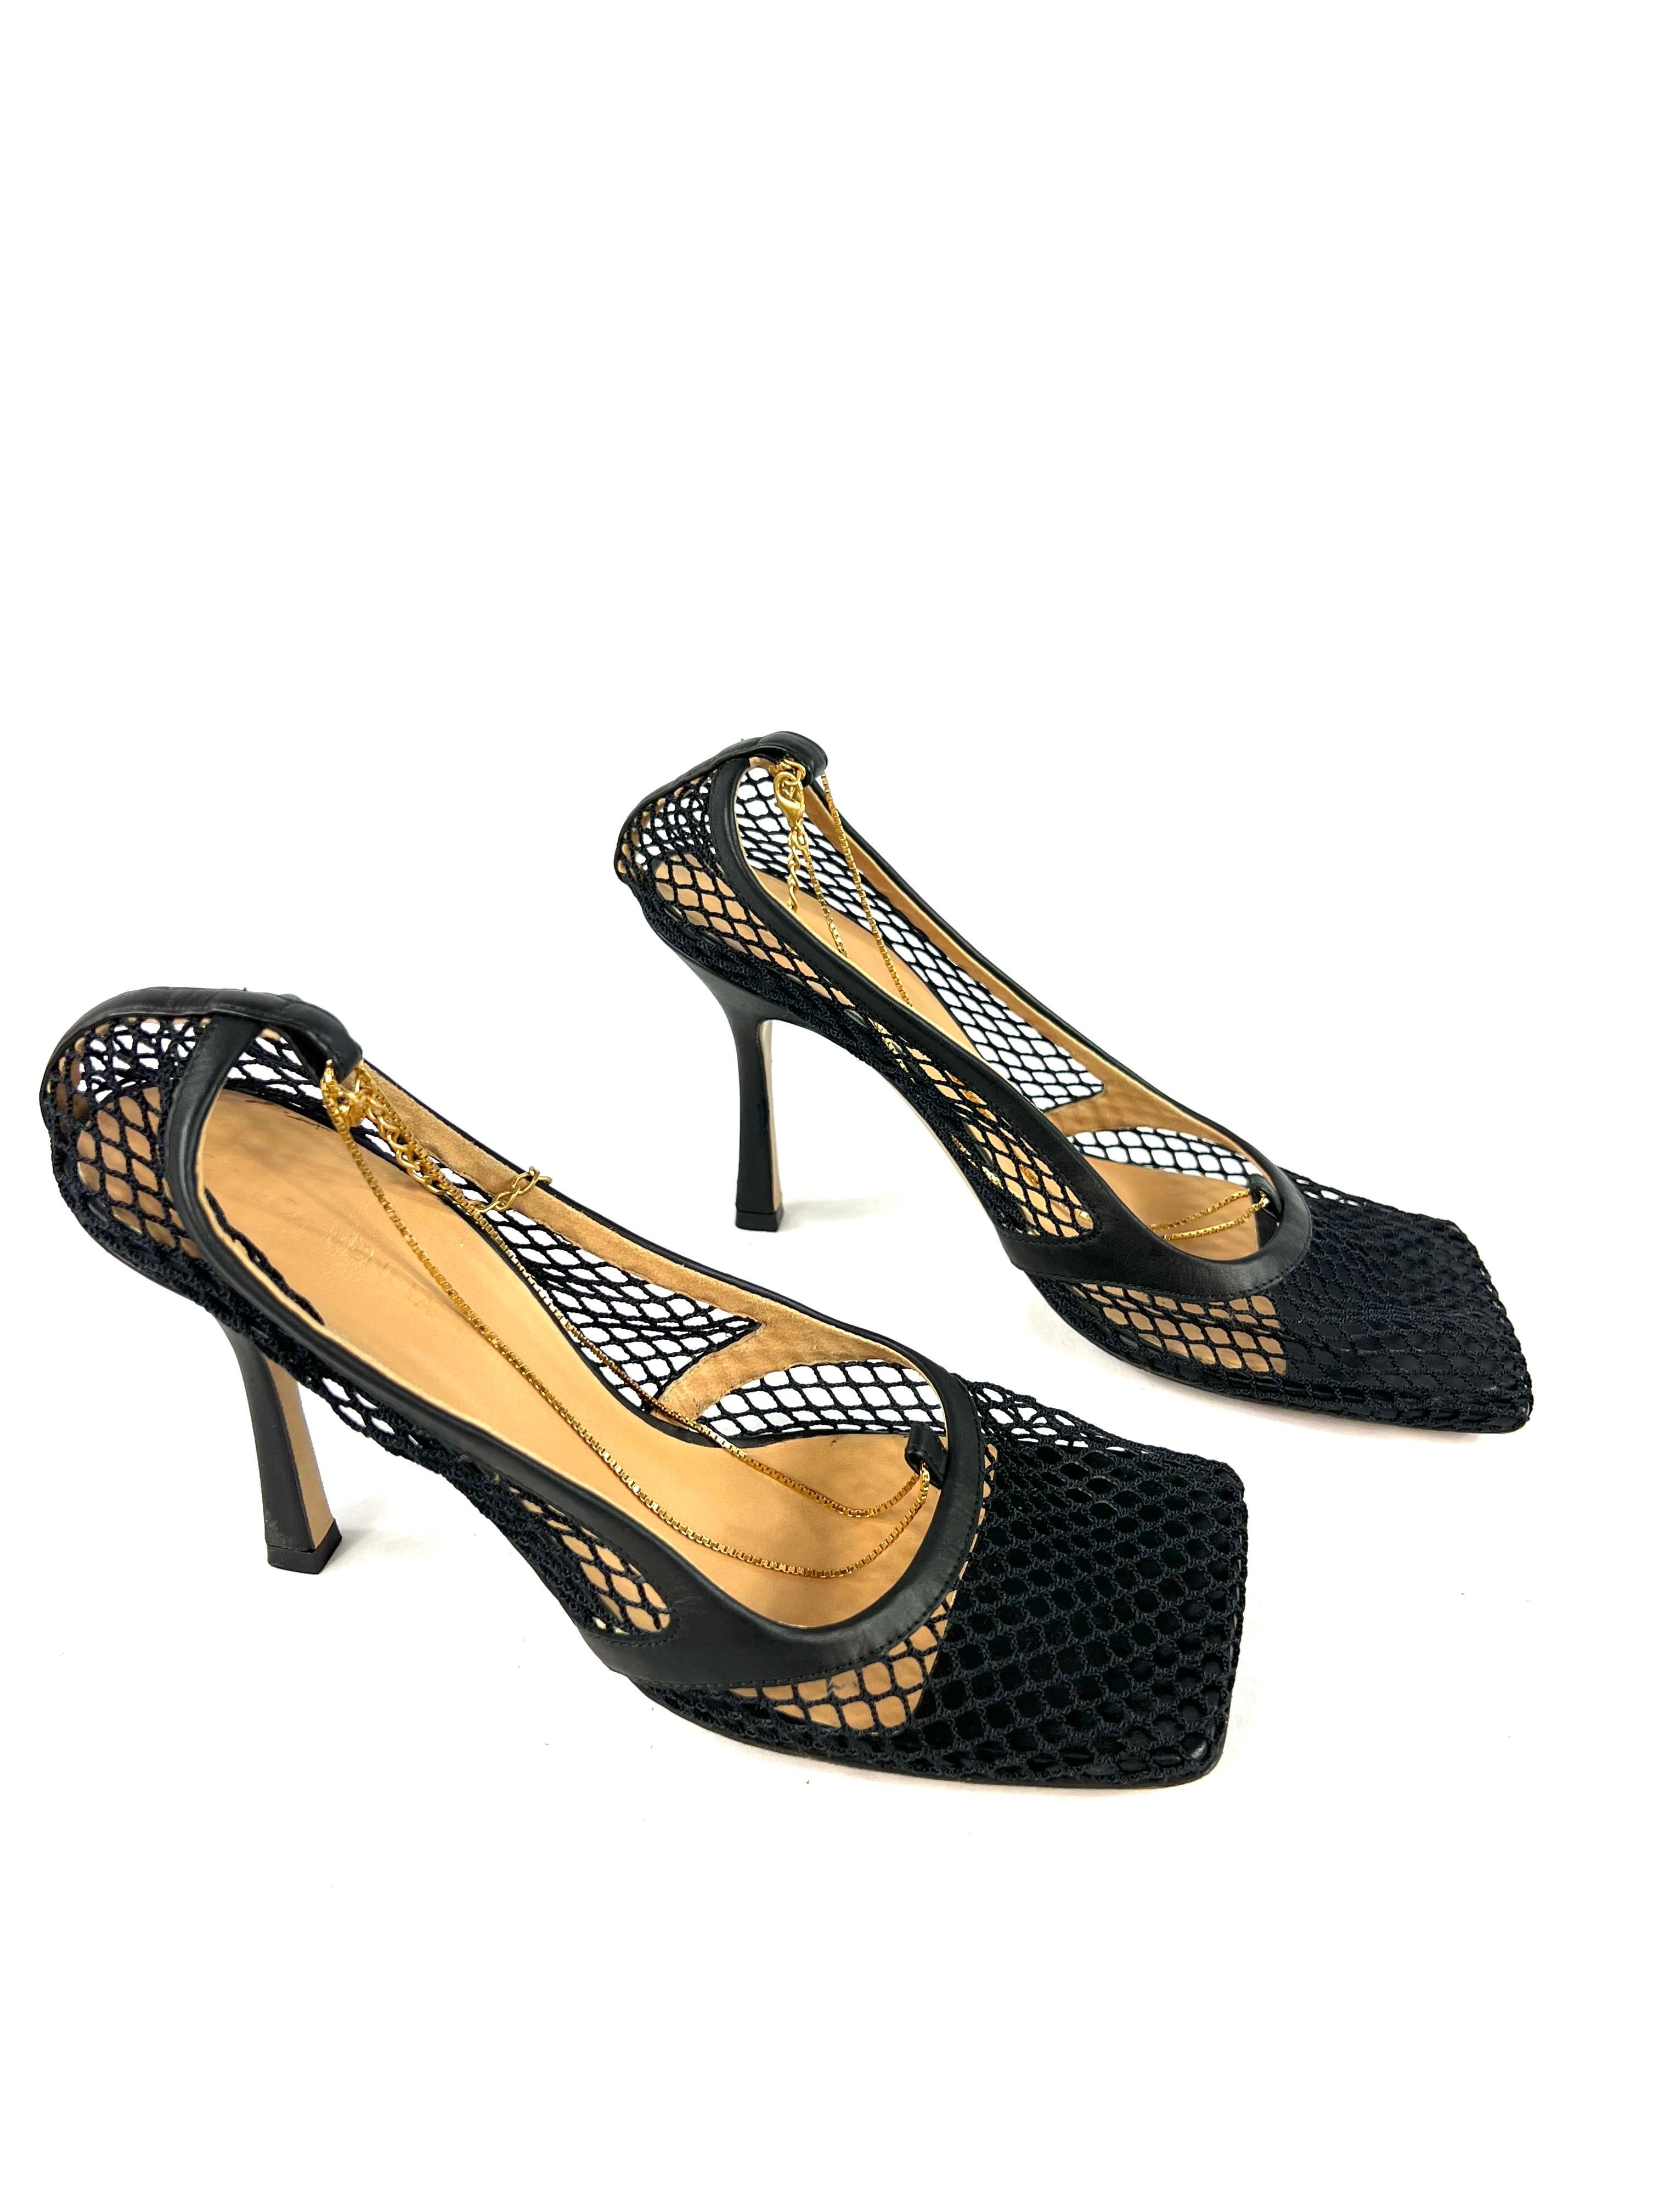 Product details:

The shoes are made out of black leather and mesh with gold tone hardware chain detail. The heel height is 4”. Comes with the dust bags. Est. Retail is 1,020.